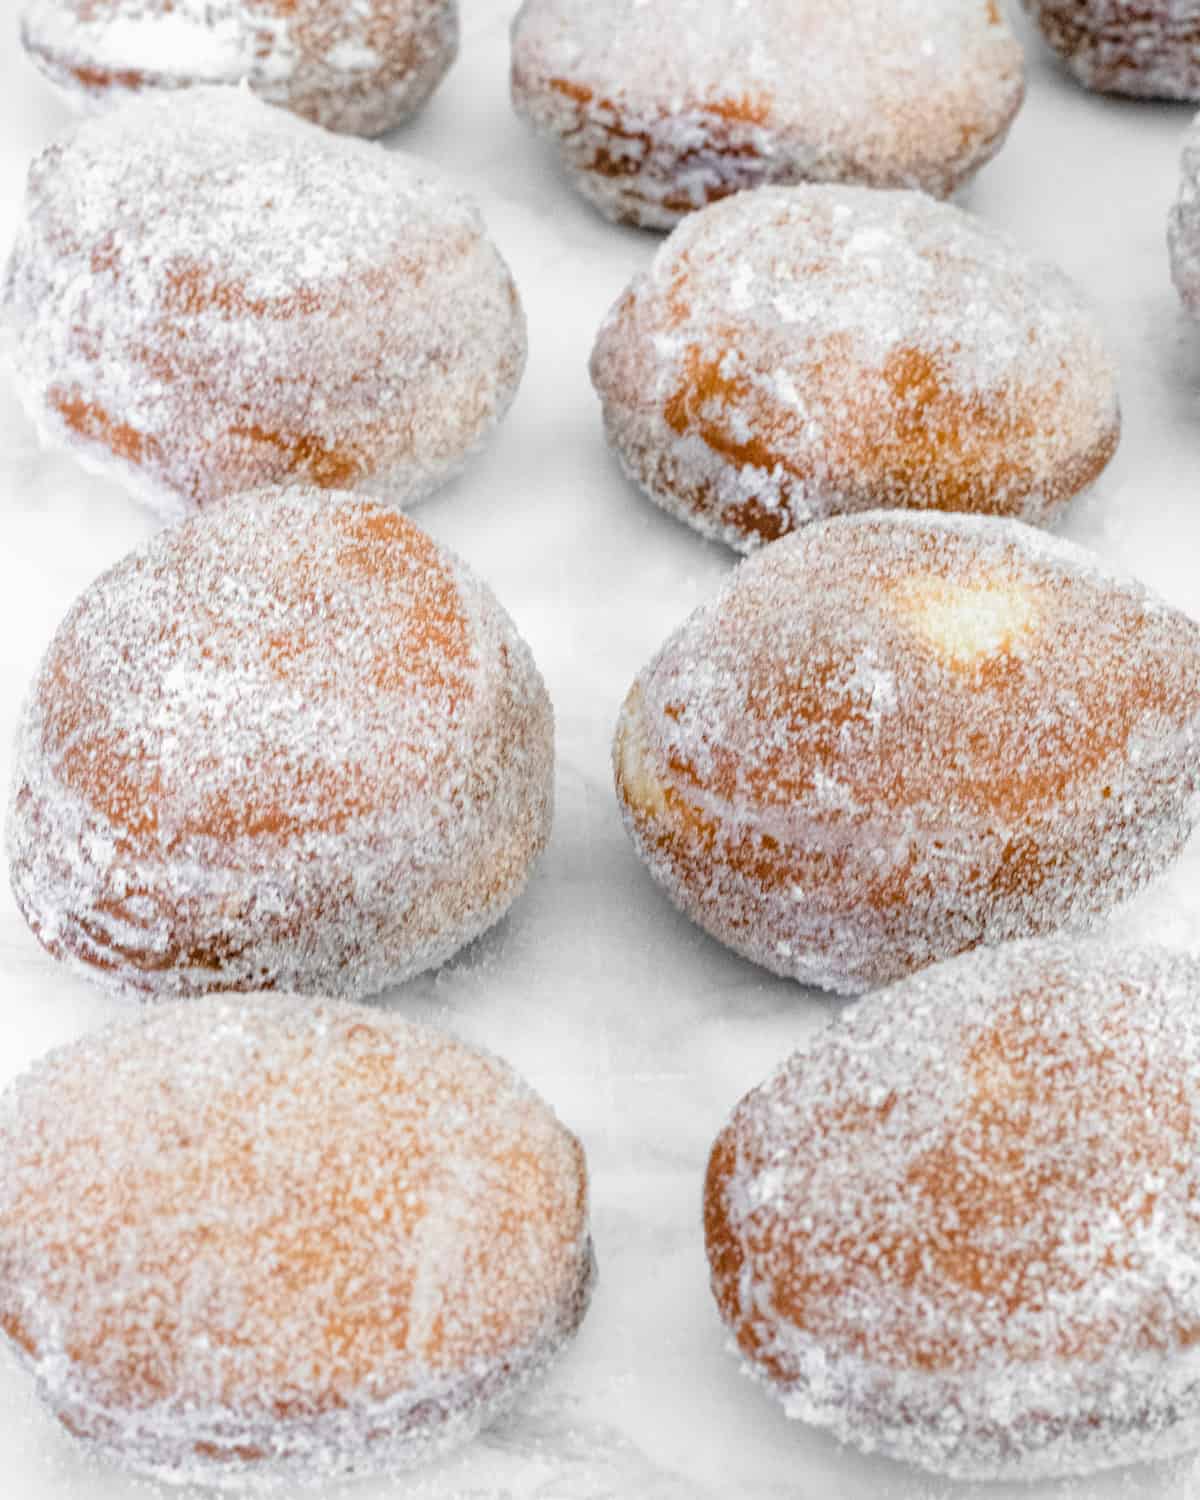 The paczki dough recipe is complete - two rows of sugar coated paczki.